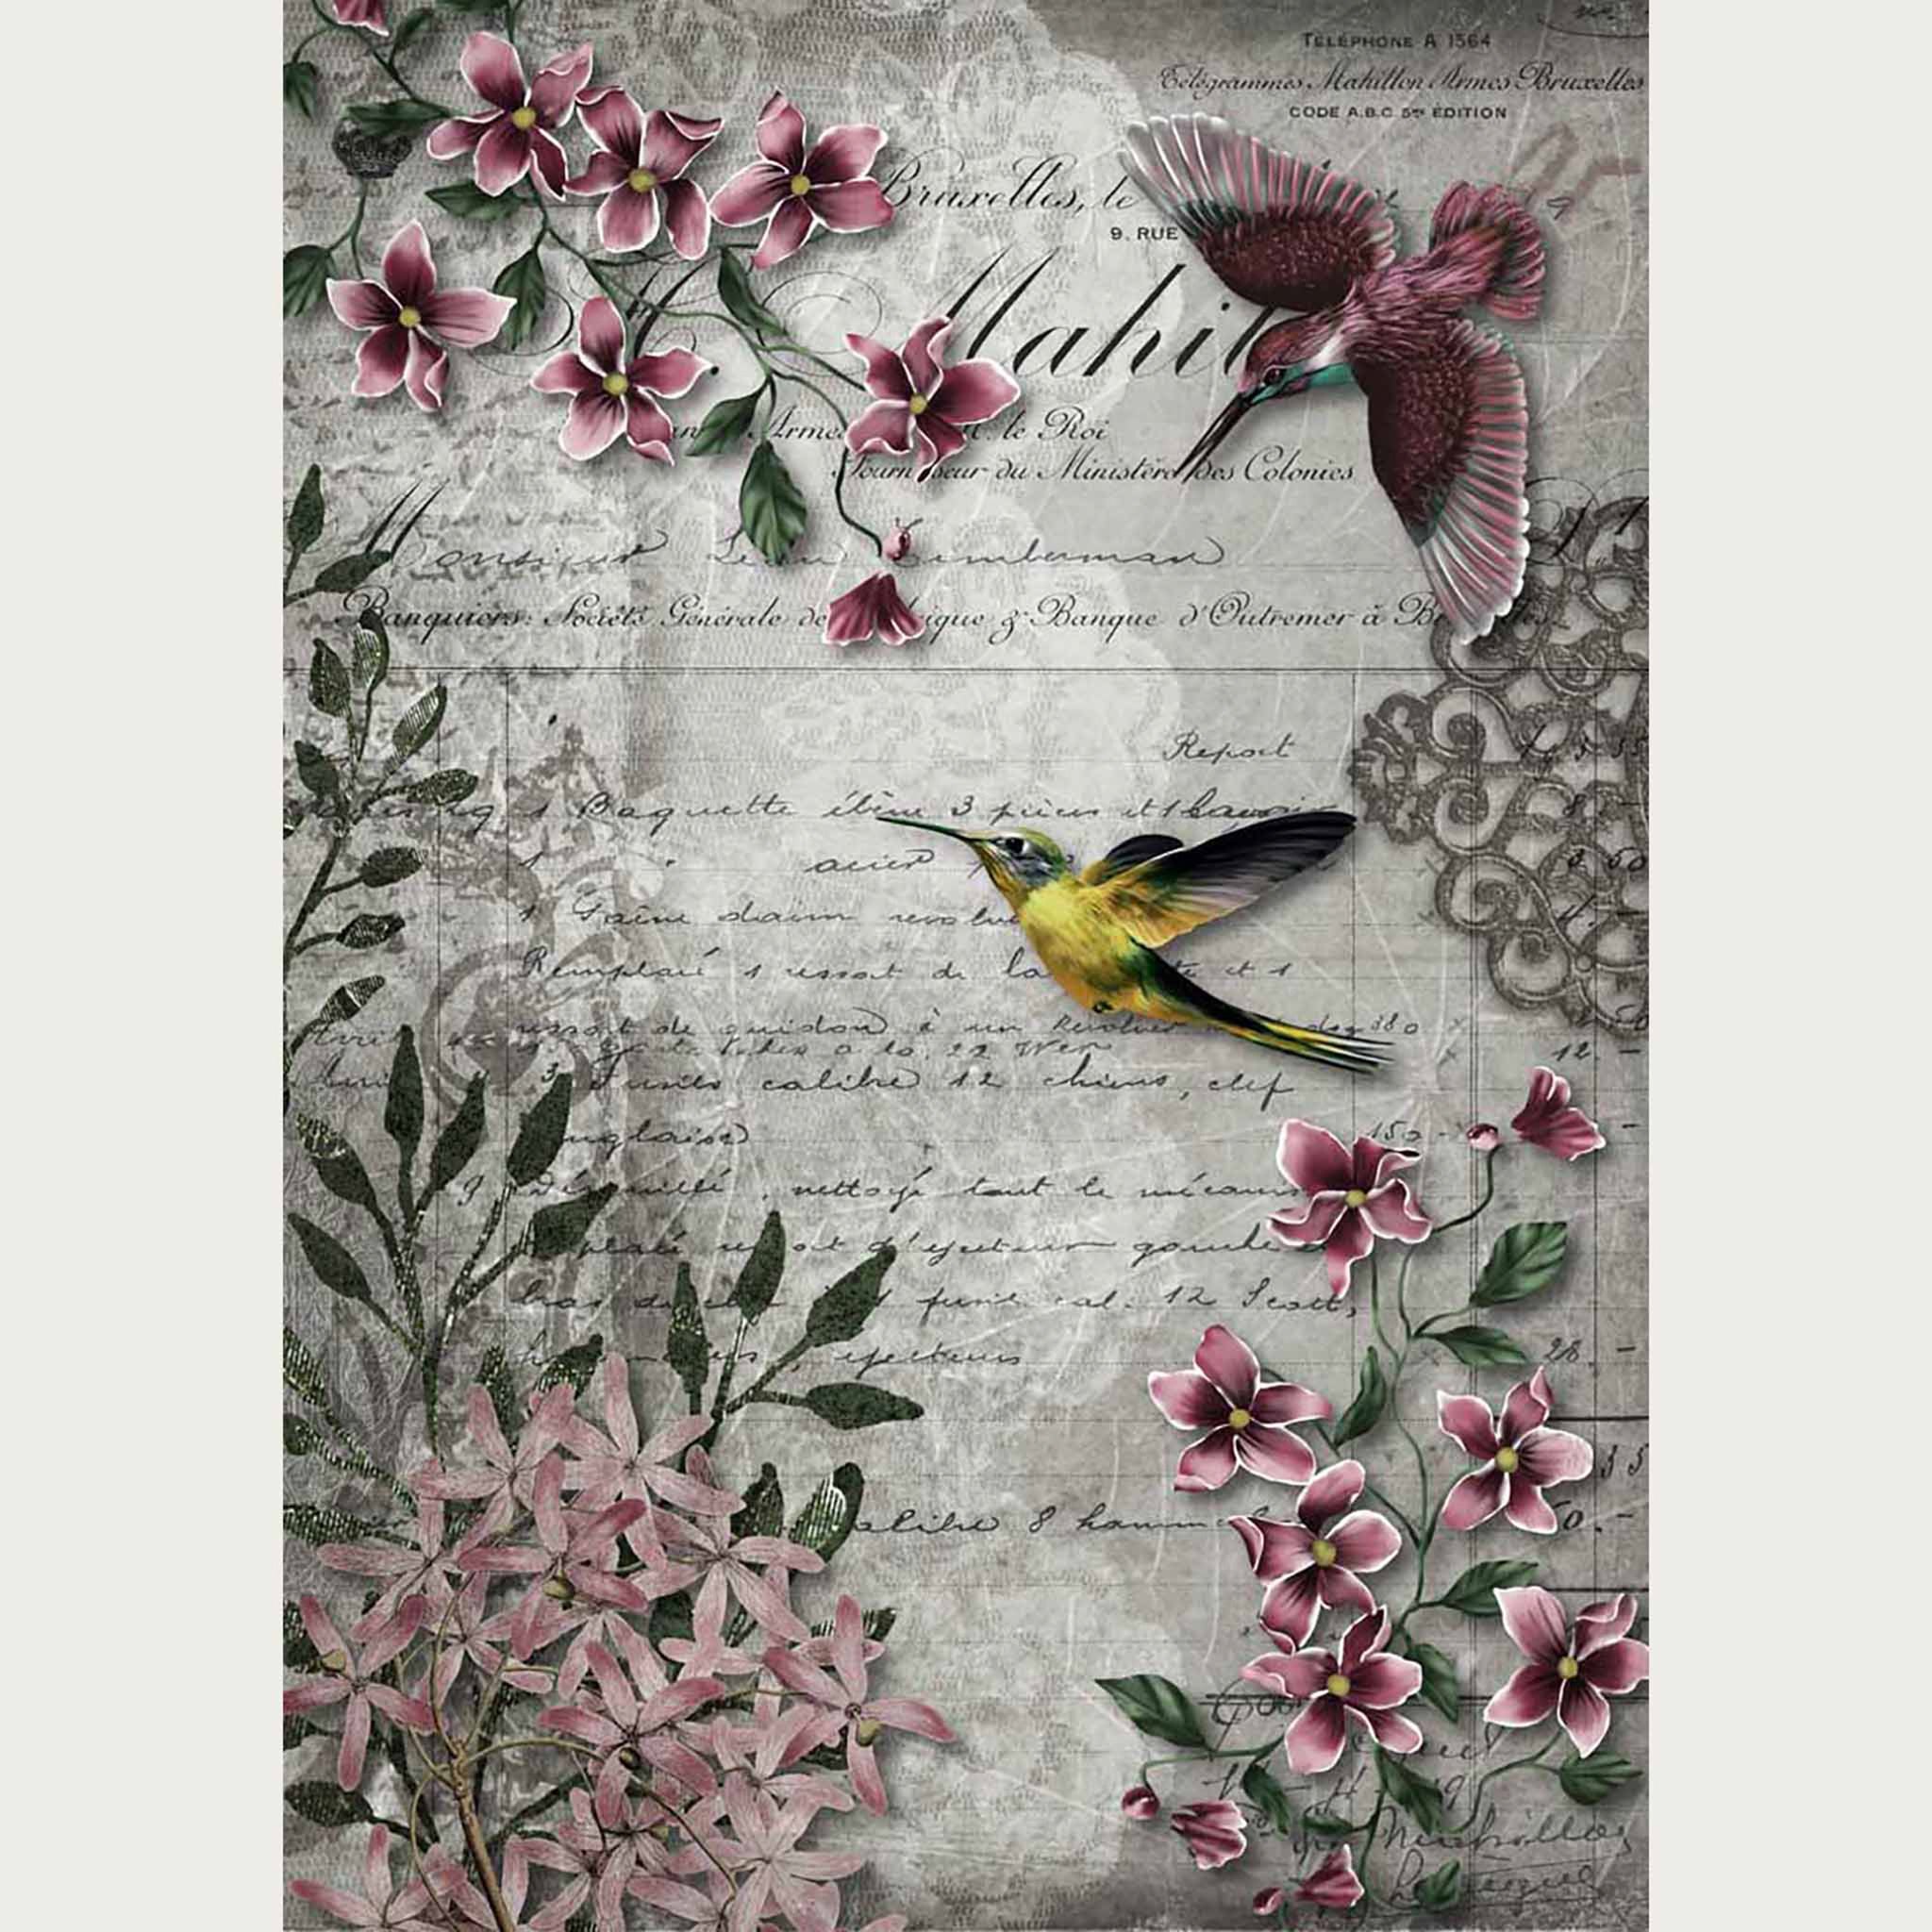 A1 rice paper design featuring a beautiful combination of hummingbirds, flowers, and scrollwork against a light gray script letter. White borders are on the sides.